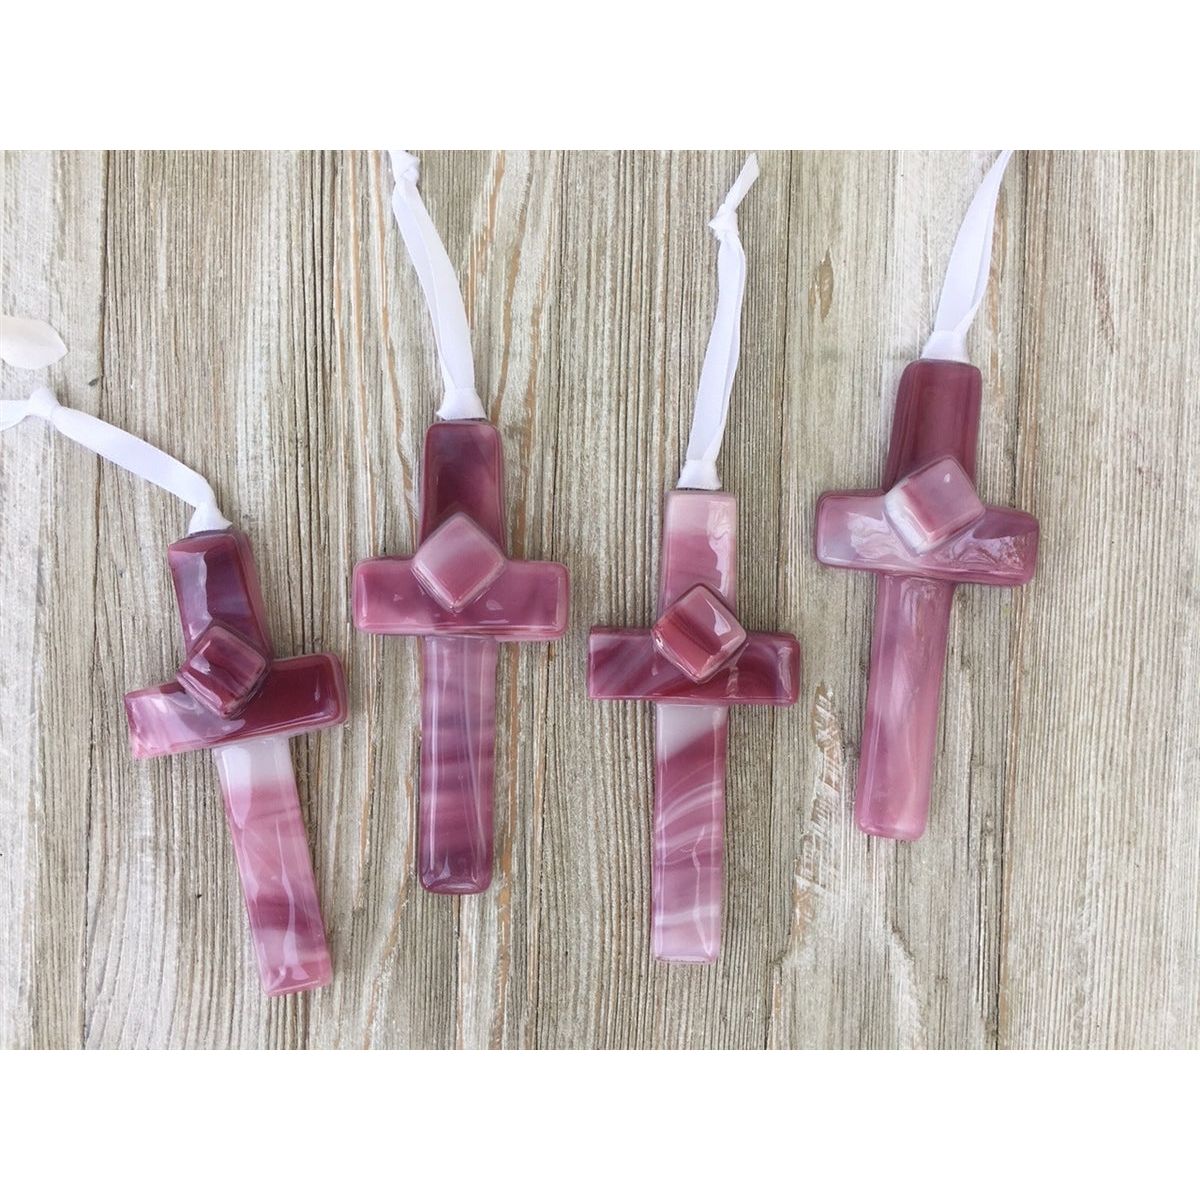 Assortment of pink glass crosses with variations of white to dark pink.